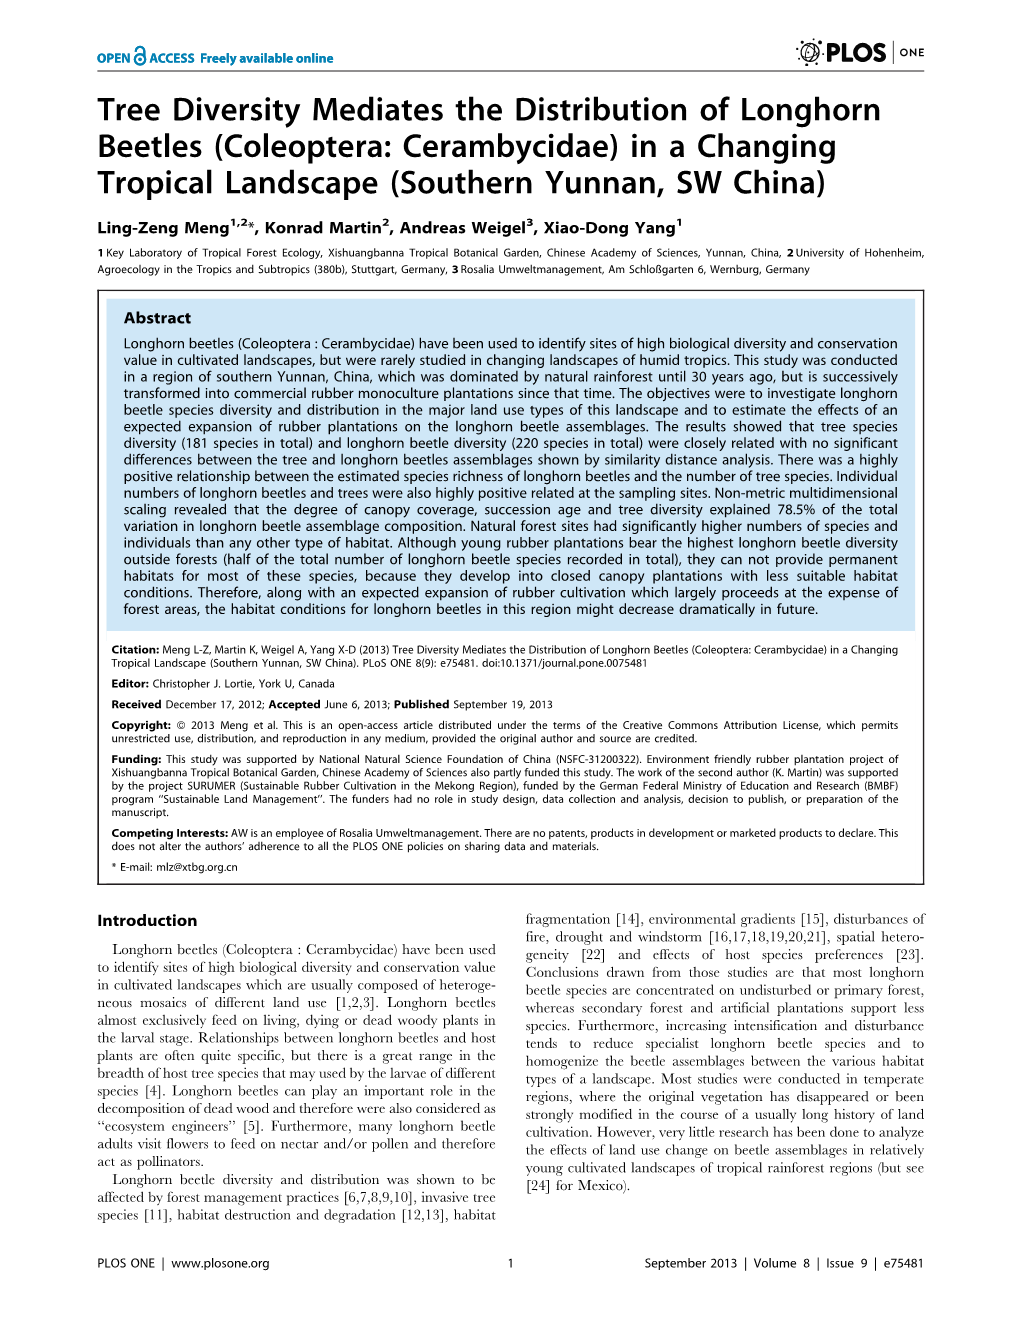 Tree Diversity Mediates the Distribution of Longhorn Beetles (Coleoptera: Cerambycidae) in a Changing Tropical Landscape (Southern Yunnan, SW China)